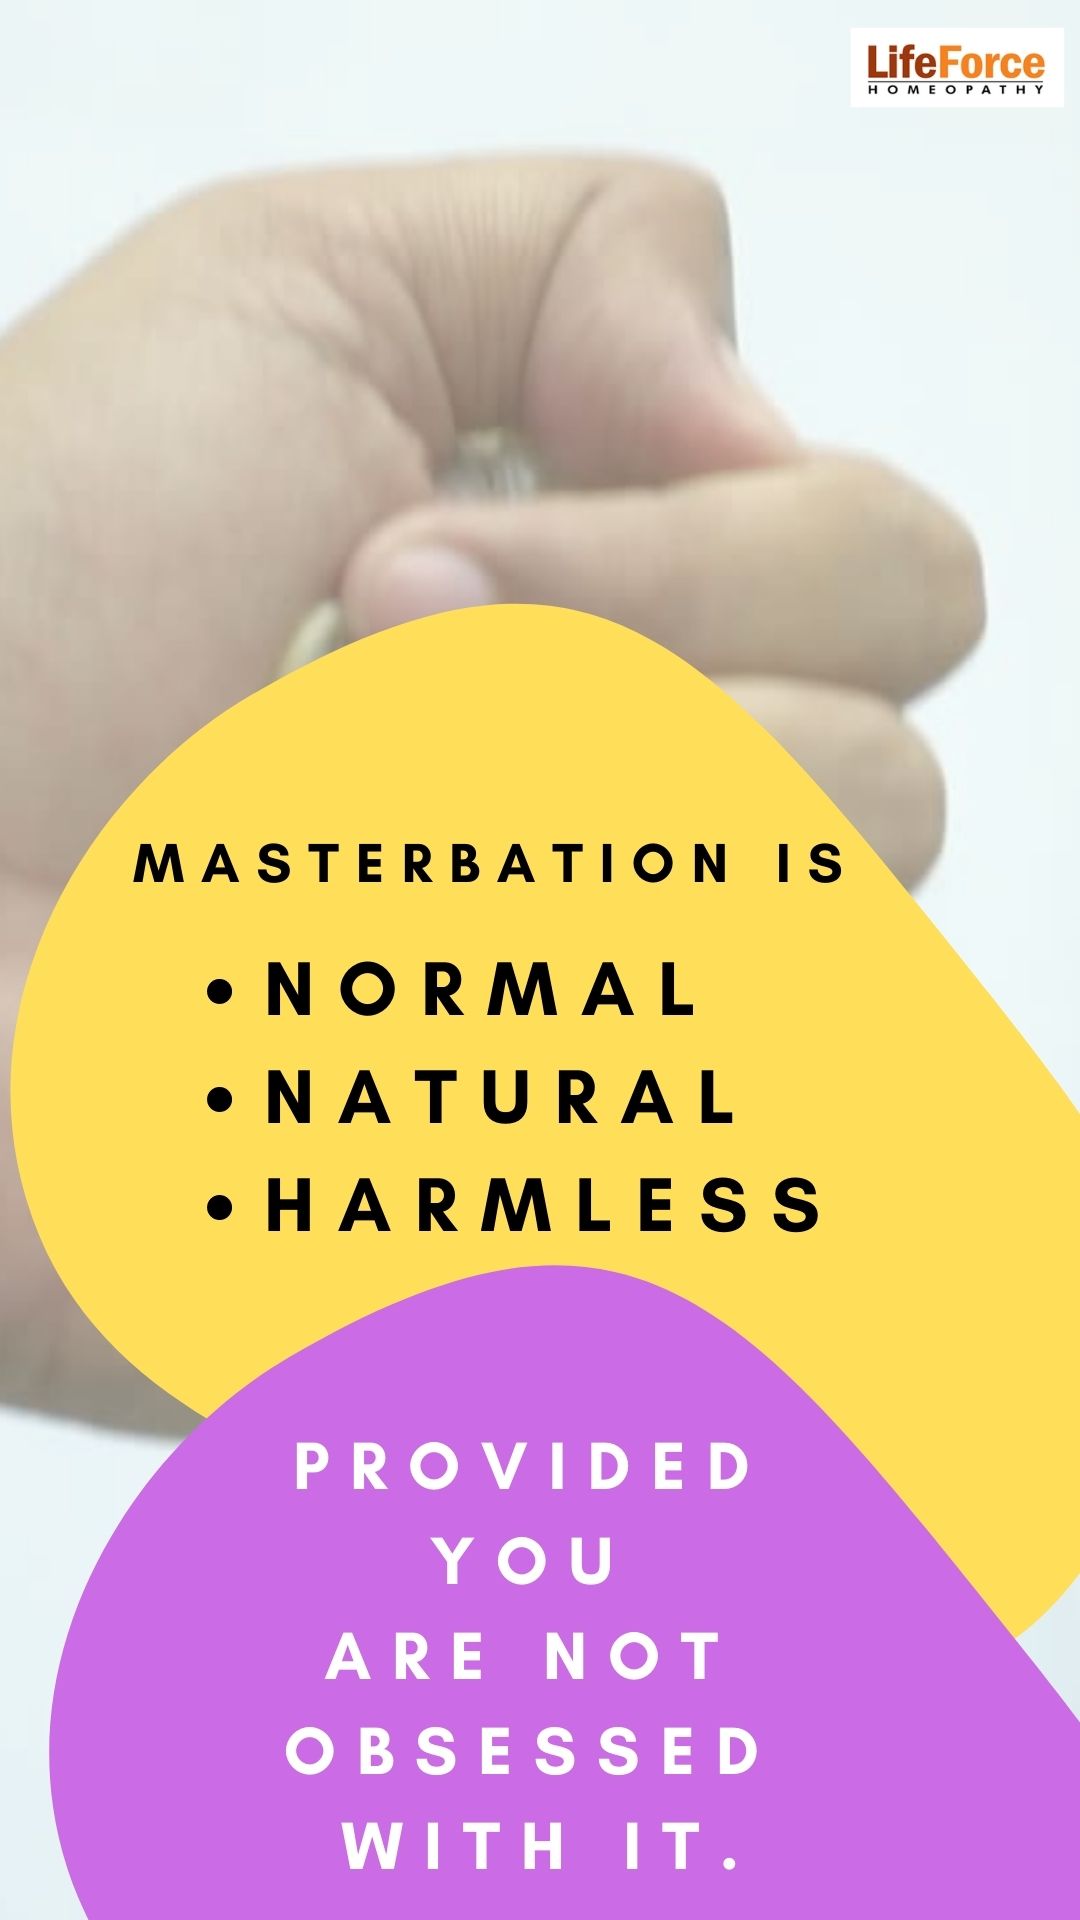 Masturbation Syndrome Myths And Facts To Know About It photo